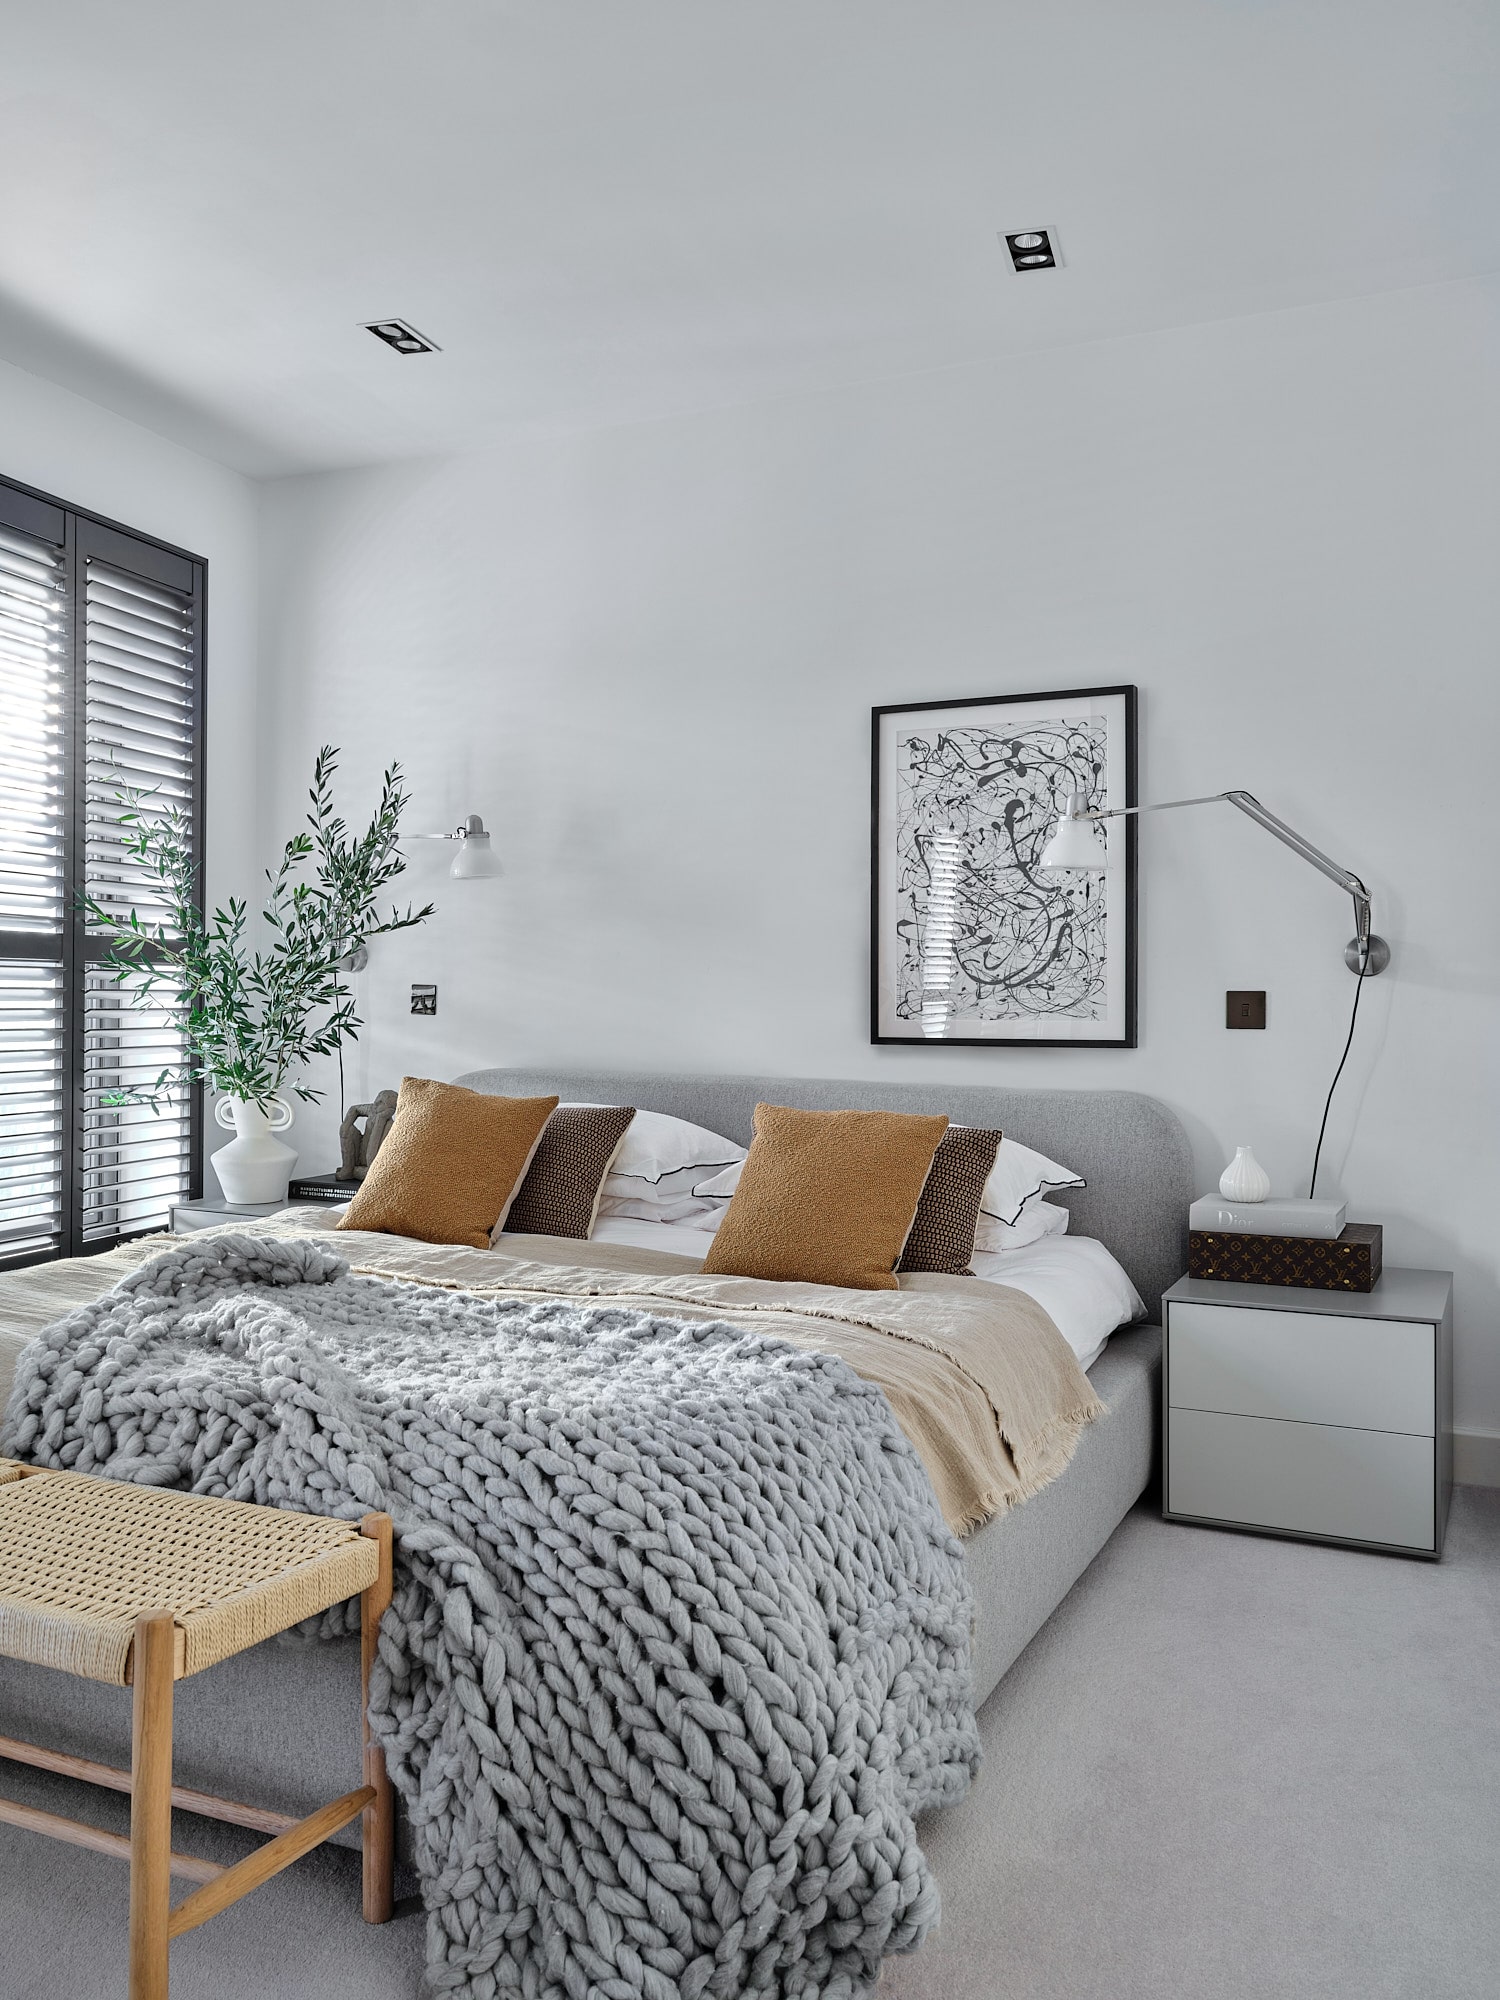 bedroom with white walls, grey bed, shutters, bedside table in minimalist style